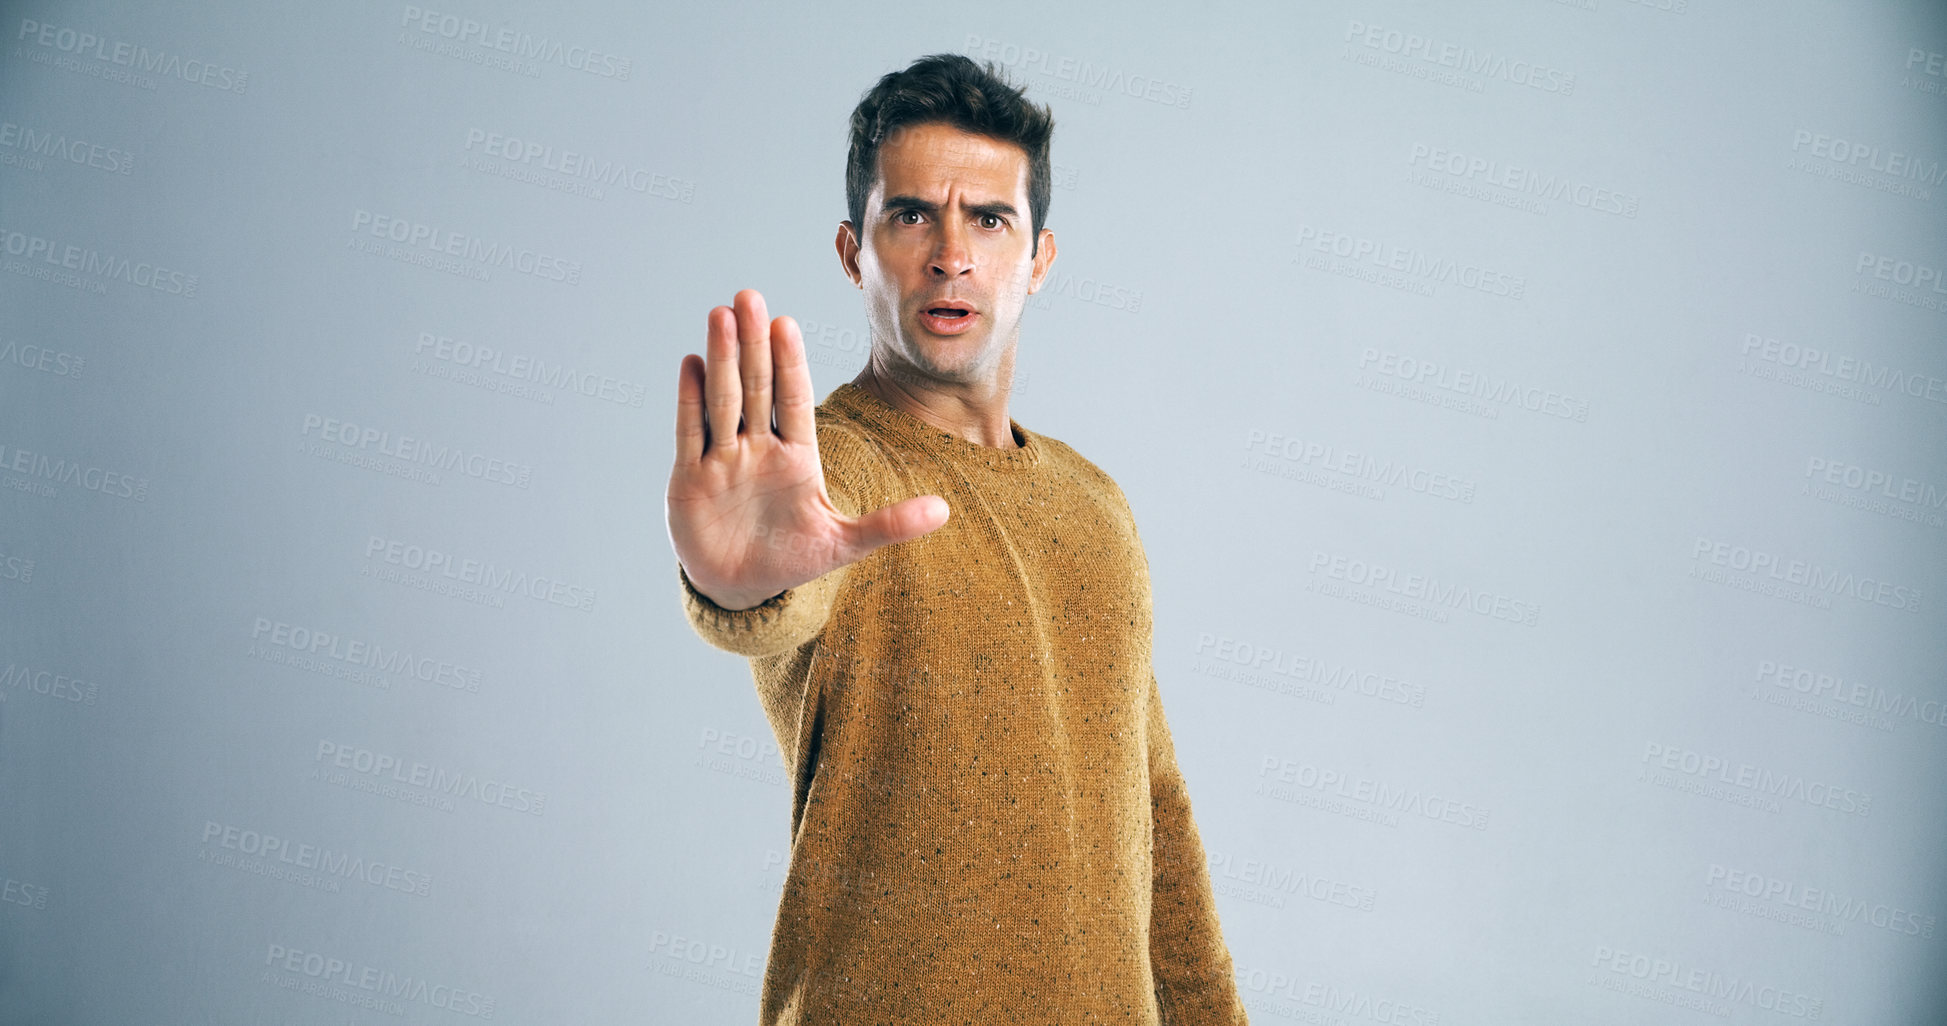 Buy stock photo Studio shot of a handsome young man gesturing to stop against a gray background